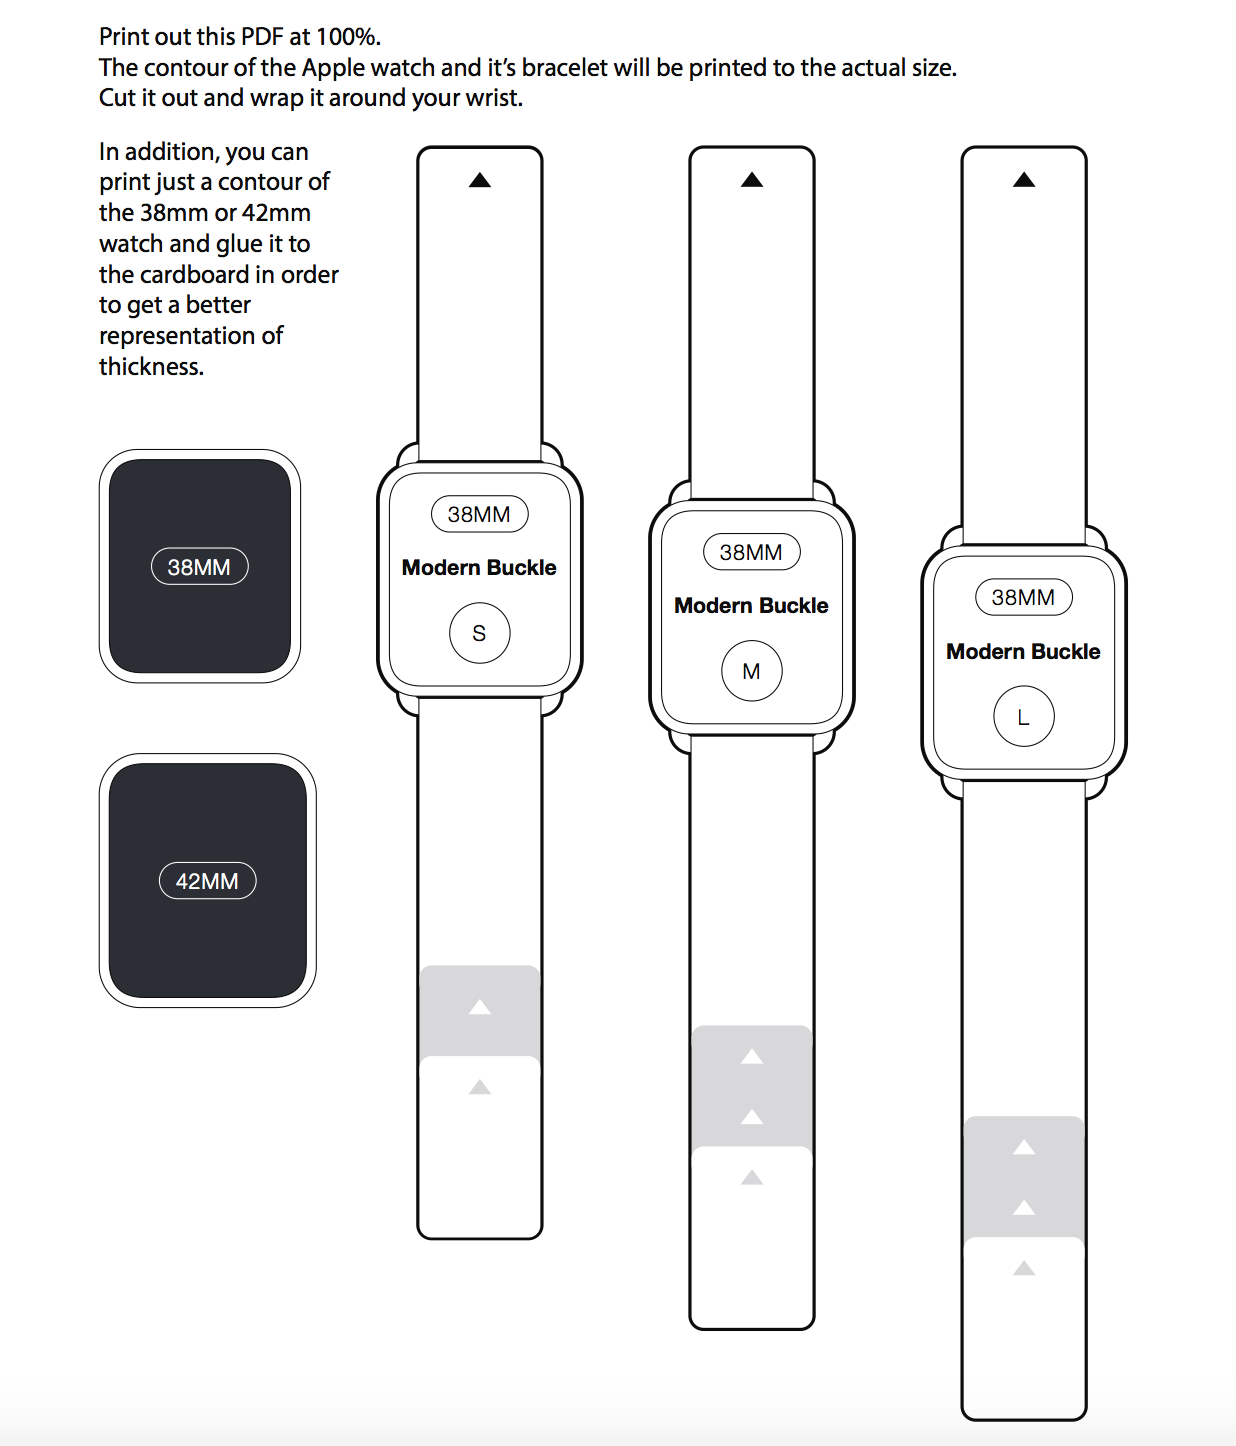 Still Not Sure Which Size Apple Watch or Band to Order? Print Out These Mockups